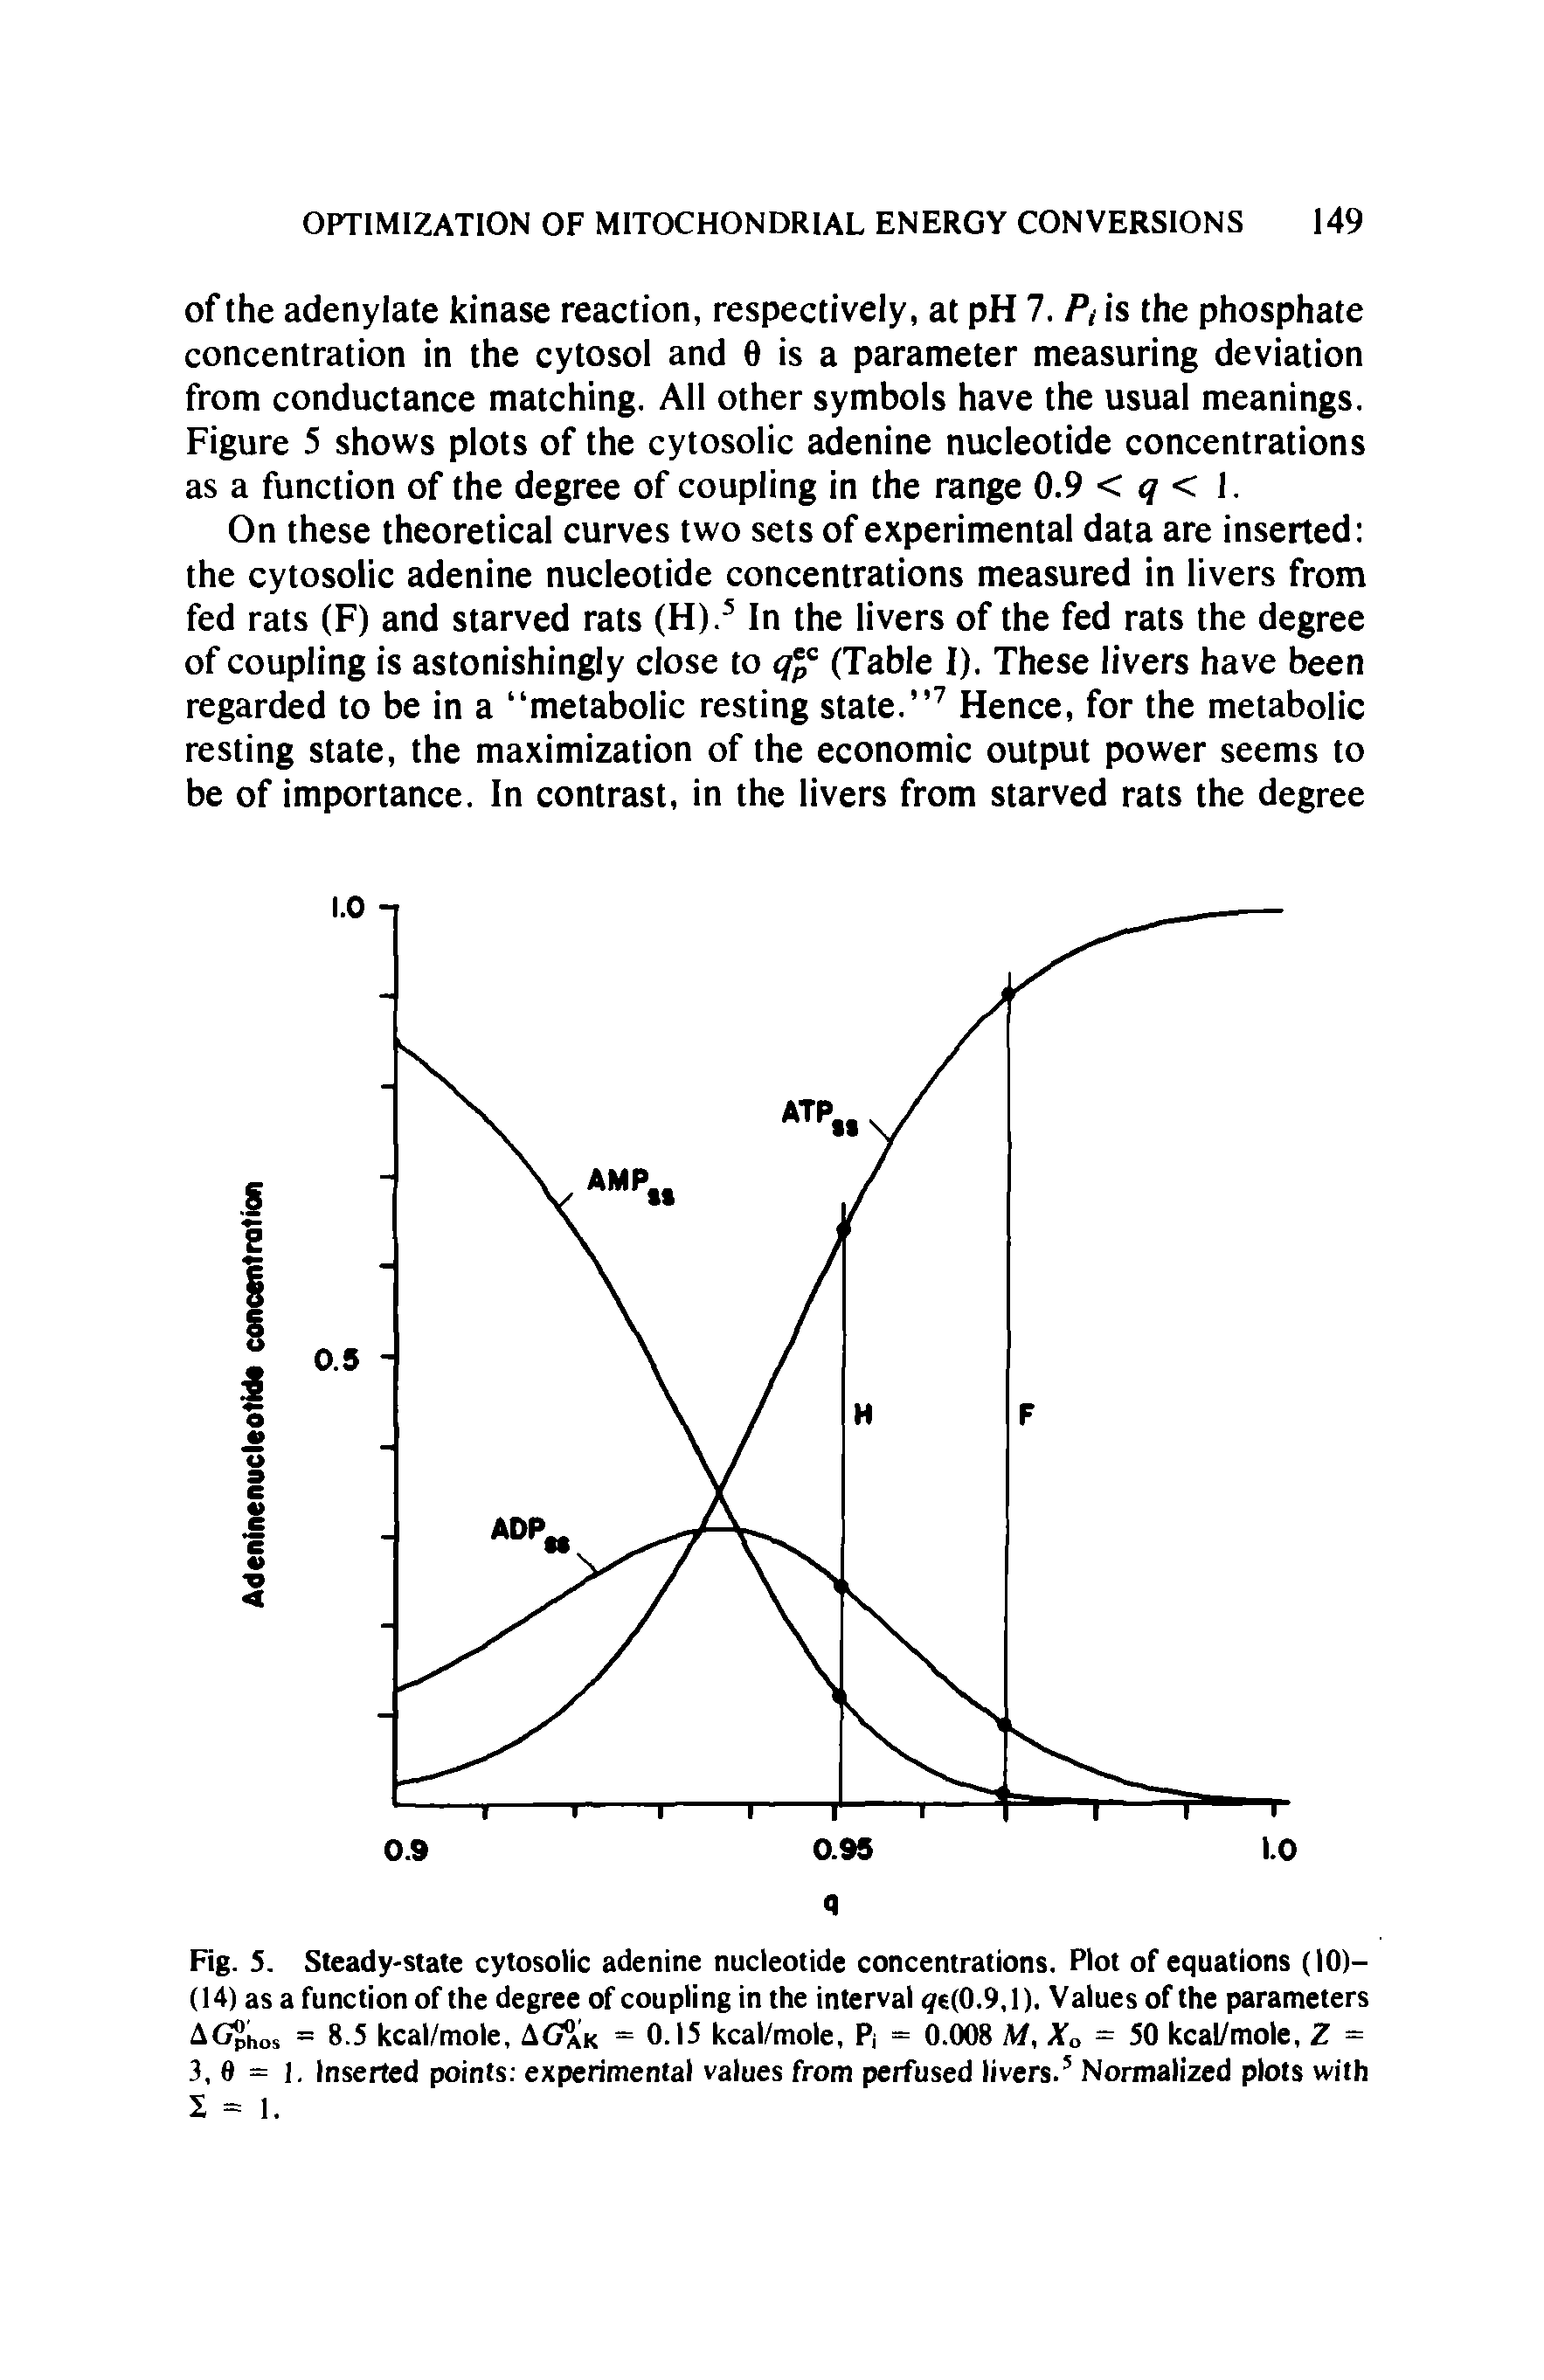 Fig. 5. Steady-state cytosolic adenine nucleotide concentrations. Plot of equations (10)-(14) as a function of the degree of coupling in the interval qe(0.9,l). Values of the parameters AGj hos = 8.5 kcal/mole, AGak = 0.15 kcal/mole, Pj = 0.008 M, Xa = 50 kcal/mole, Z = 3, 0 = l. Inserted points experimental values from perfused livers.5 Normalized plots with 2=1.